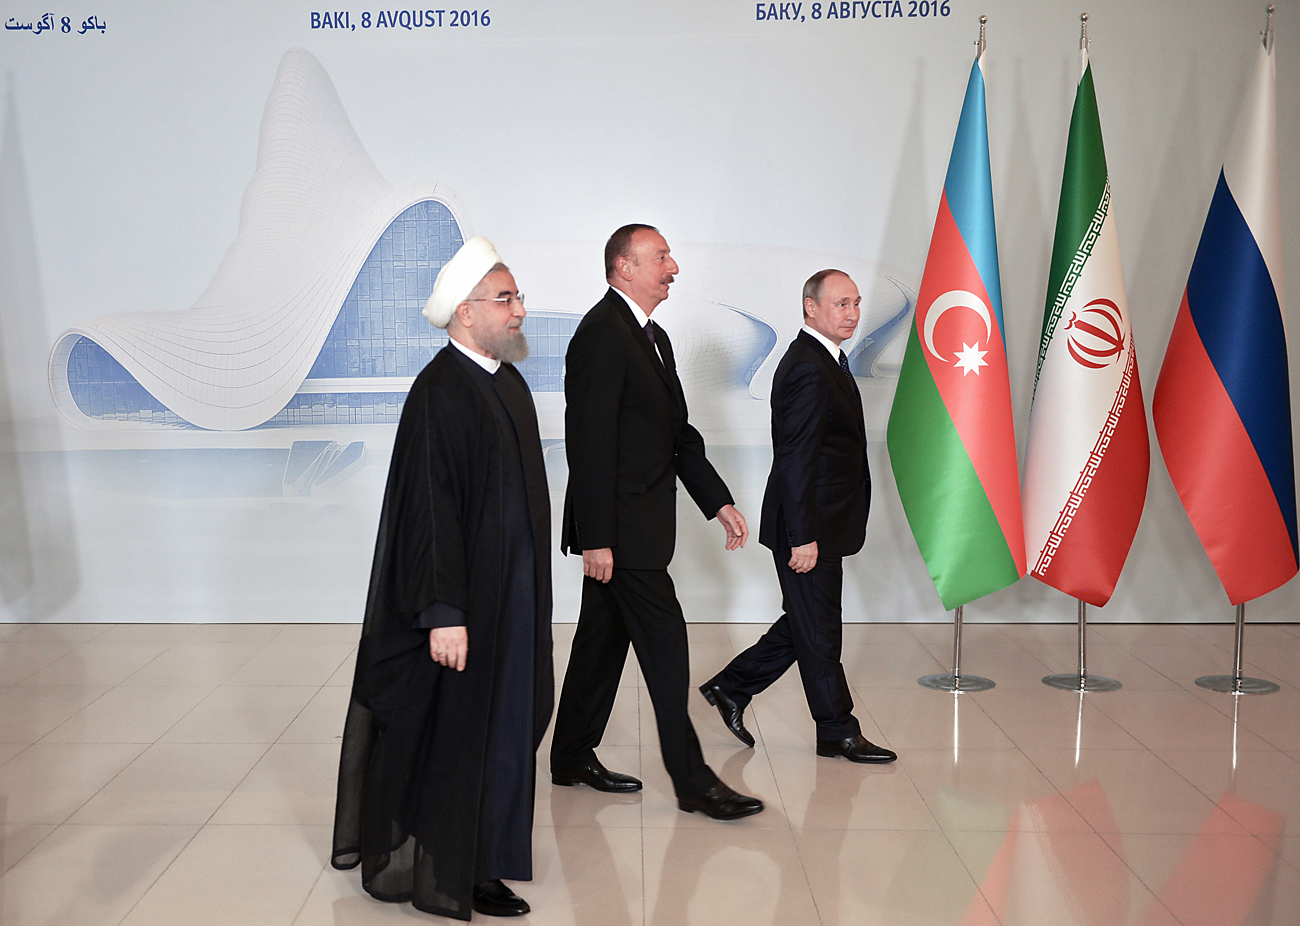 Russian President Vladimir Putin, President of Azerbaijan Ilham Aliyev and Hassan Rouhani, President of the Islamic Republic of Iran, during a photo session prior to the beginning of the trilateral meeting in Baku, on Aug. 8, 2016. Source: Aleksey Nikolskyi/RIA Novosti